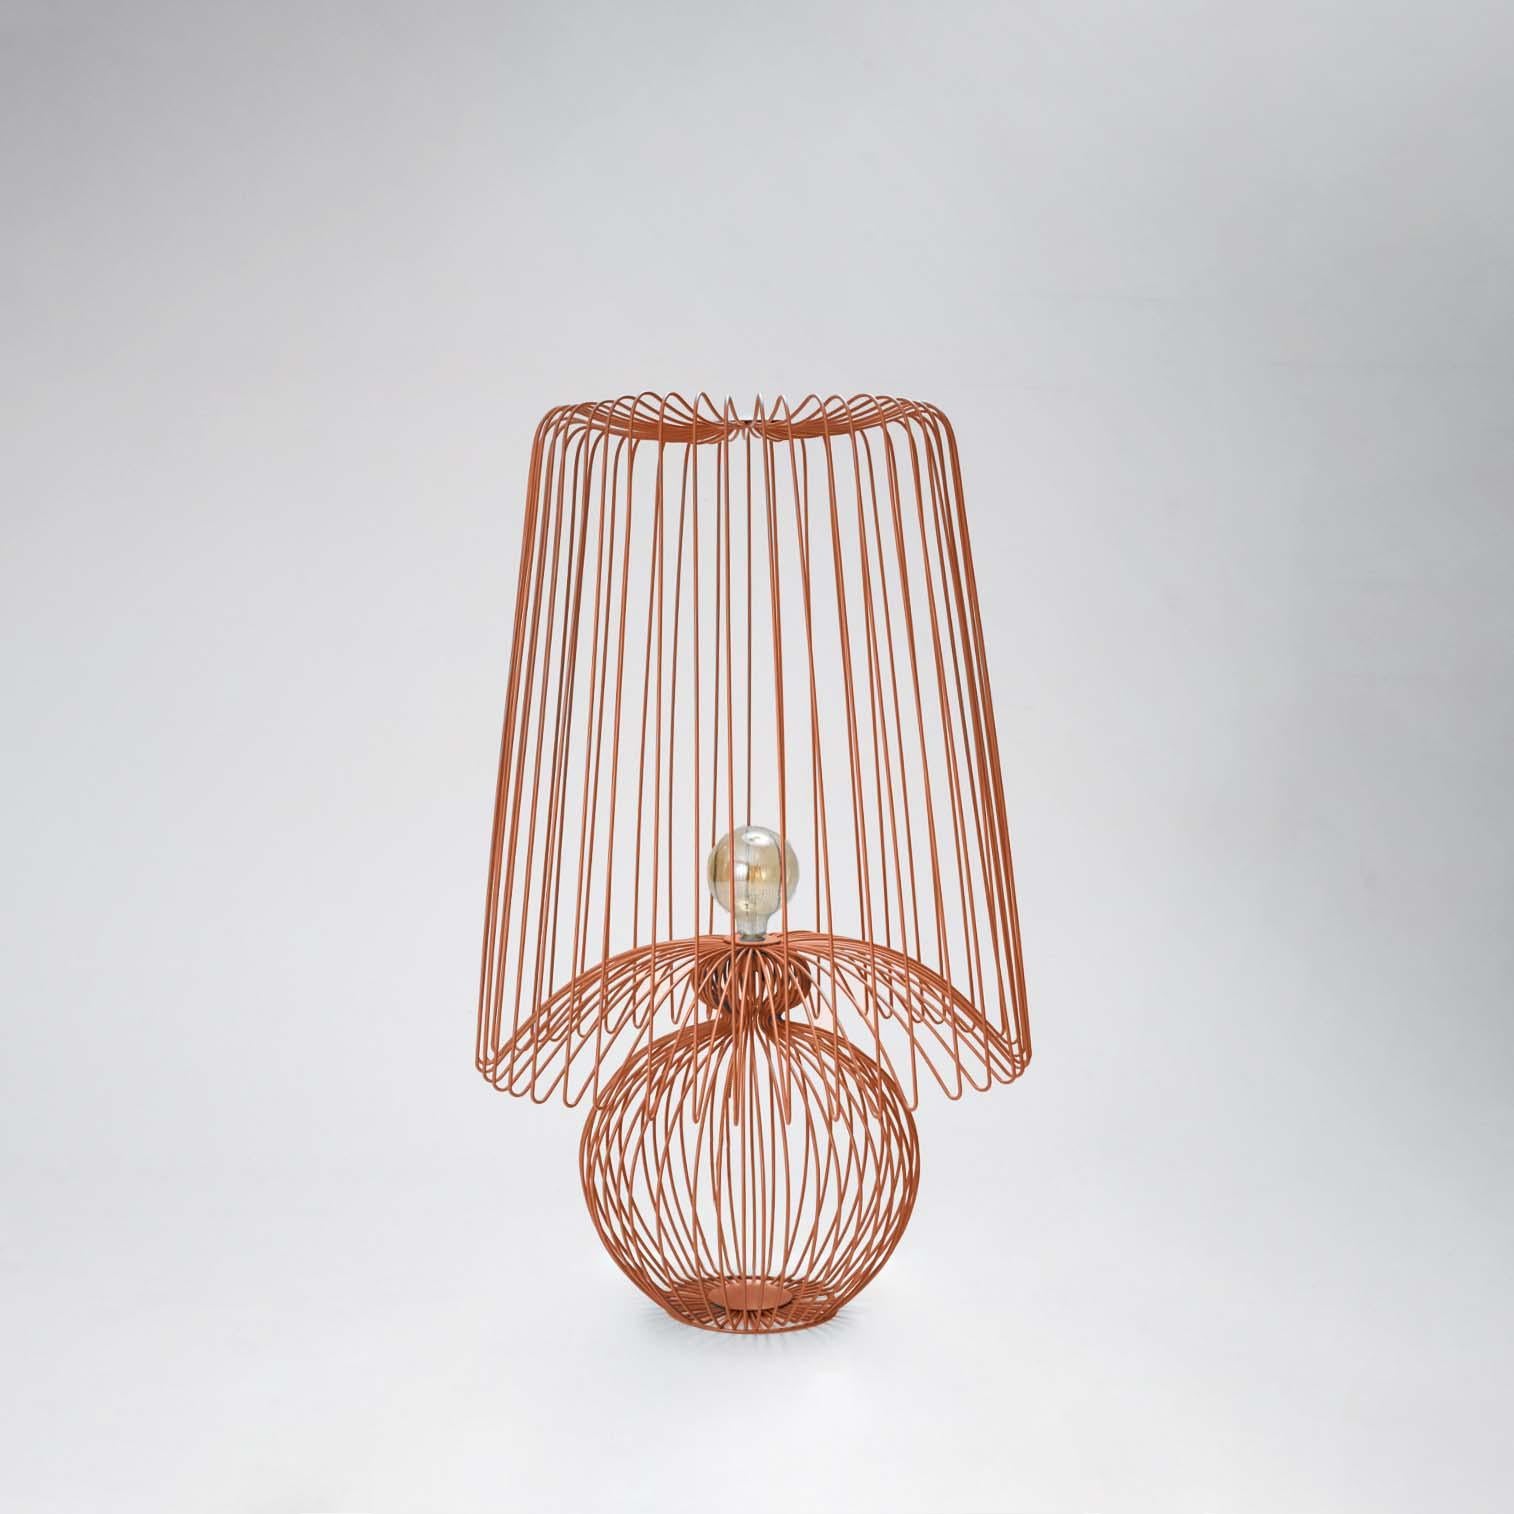 Floor lamp in rookwood terra cotta.

Achieving perfect harmony between light and transparency, this handmade wired piece can be used either for lighting or as a contemporary decorative item and statement lamp. With its distinctive design derived